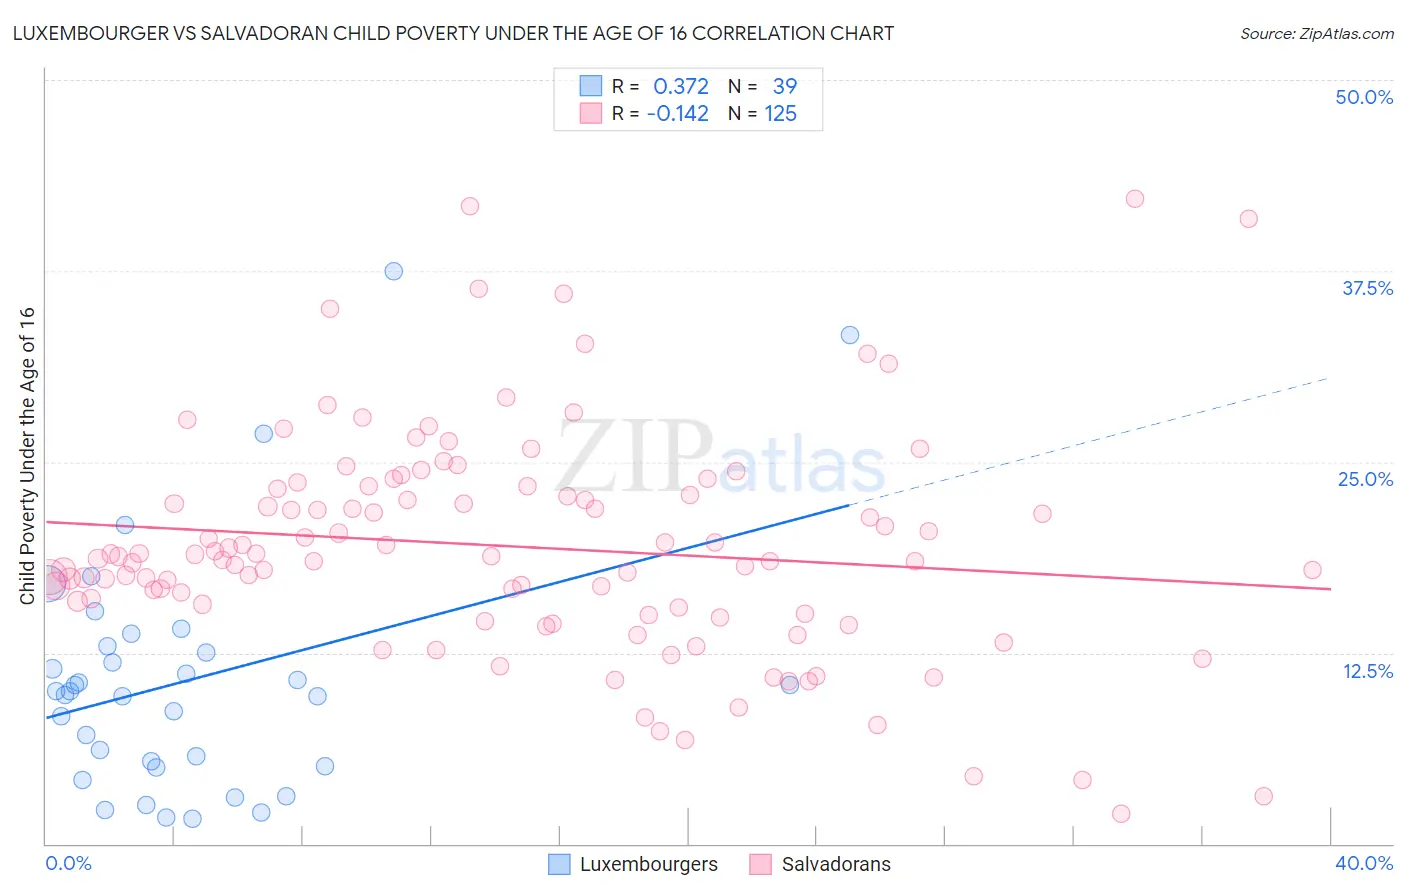 Luxembourger vs Salvadoran Child Poverty Under the Age of 16